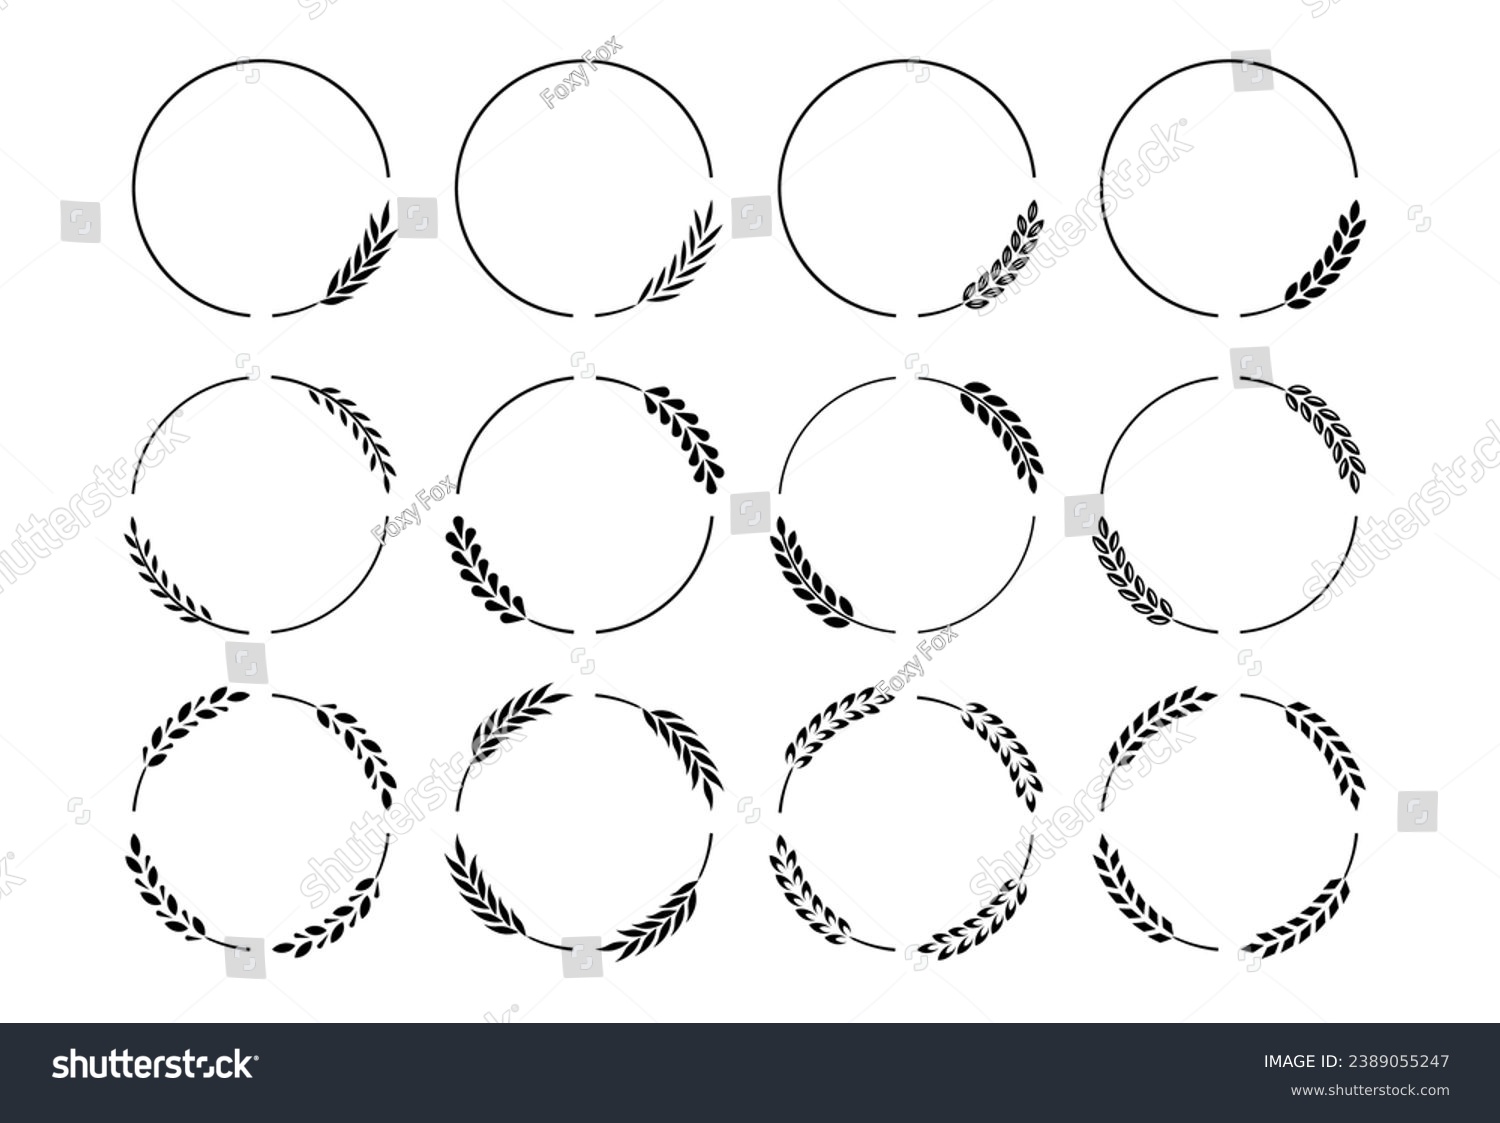 SVG of Laurel branches frames. Vintage laurel wreath round frame borders with bay leaves, ornate award, wedding invitation decorative floral elements. Isolated vector set. Organic plants in circular shape svg